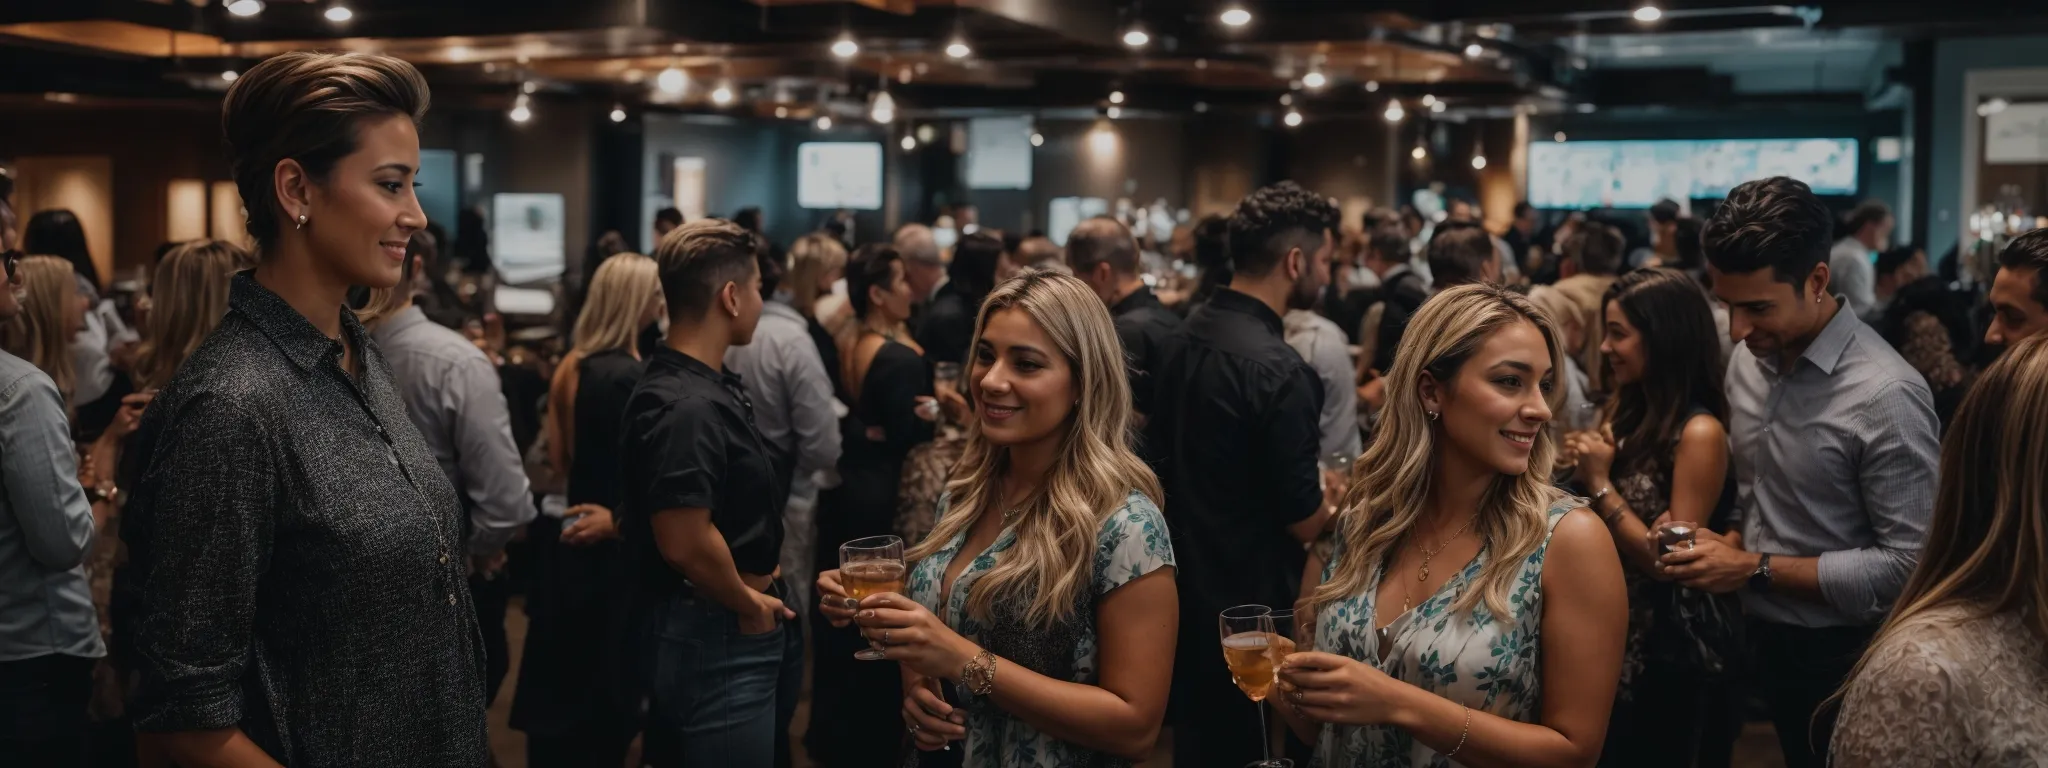 a bustling local networking event where business owners actively engage, representing the collaborative nature of effective link building strategies.